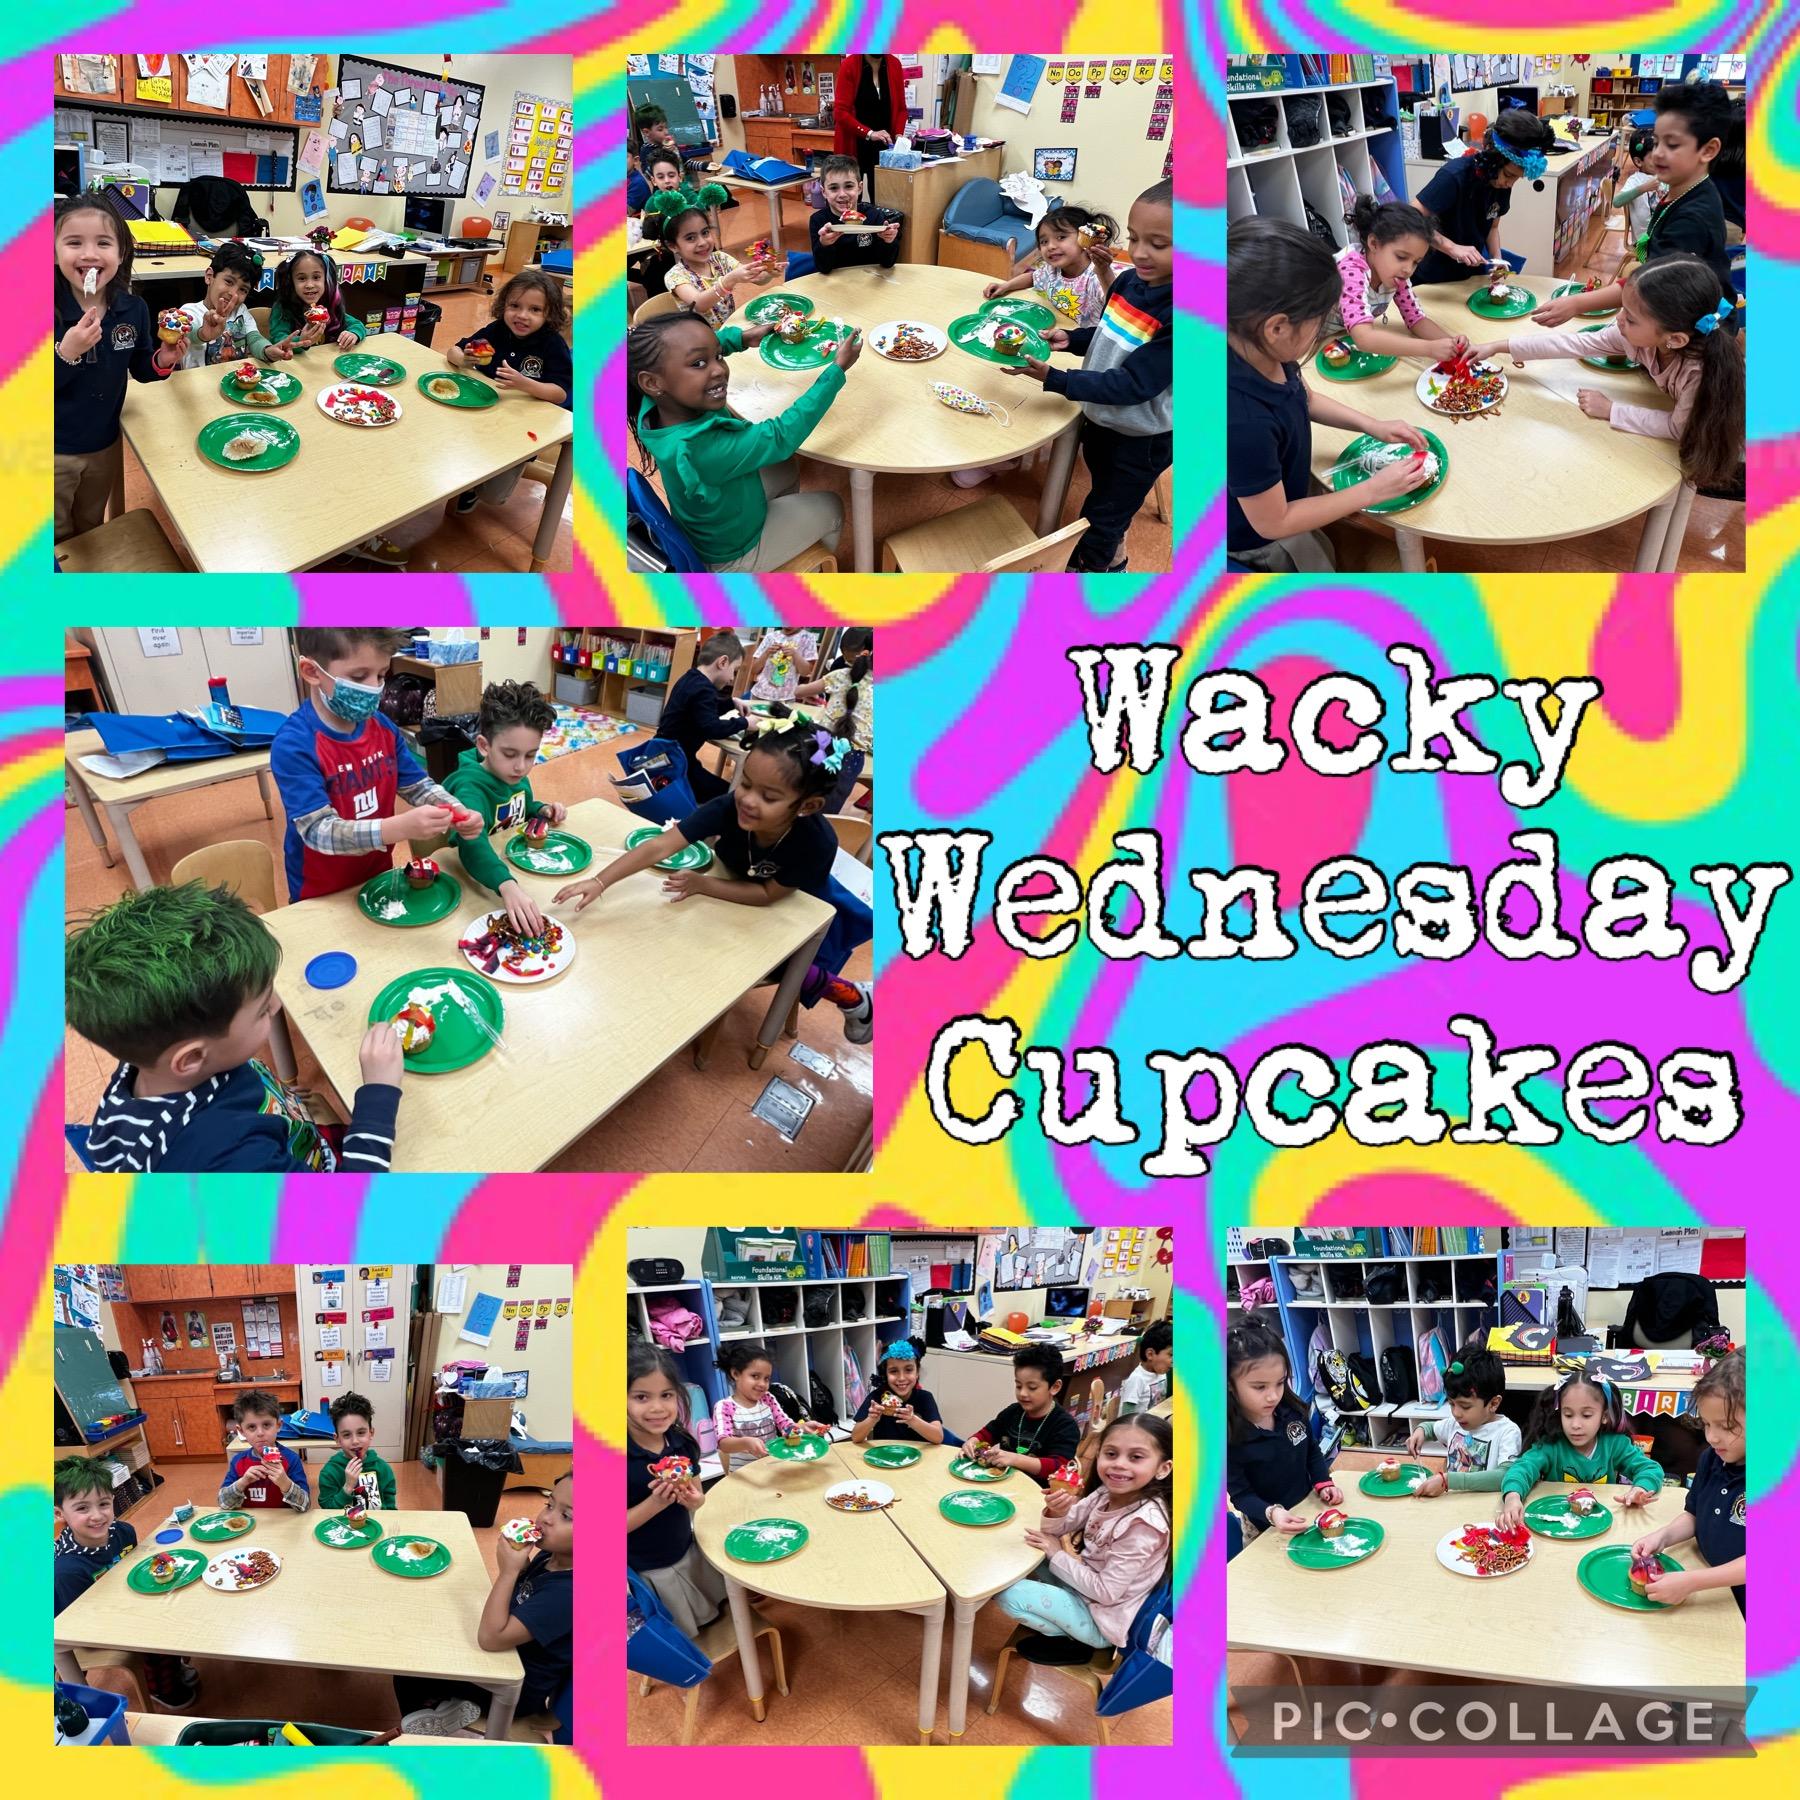 Wacky Wednesday at the Early Childhood Center